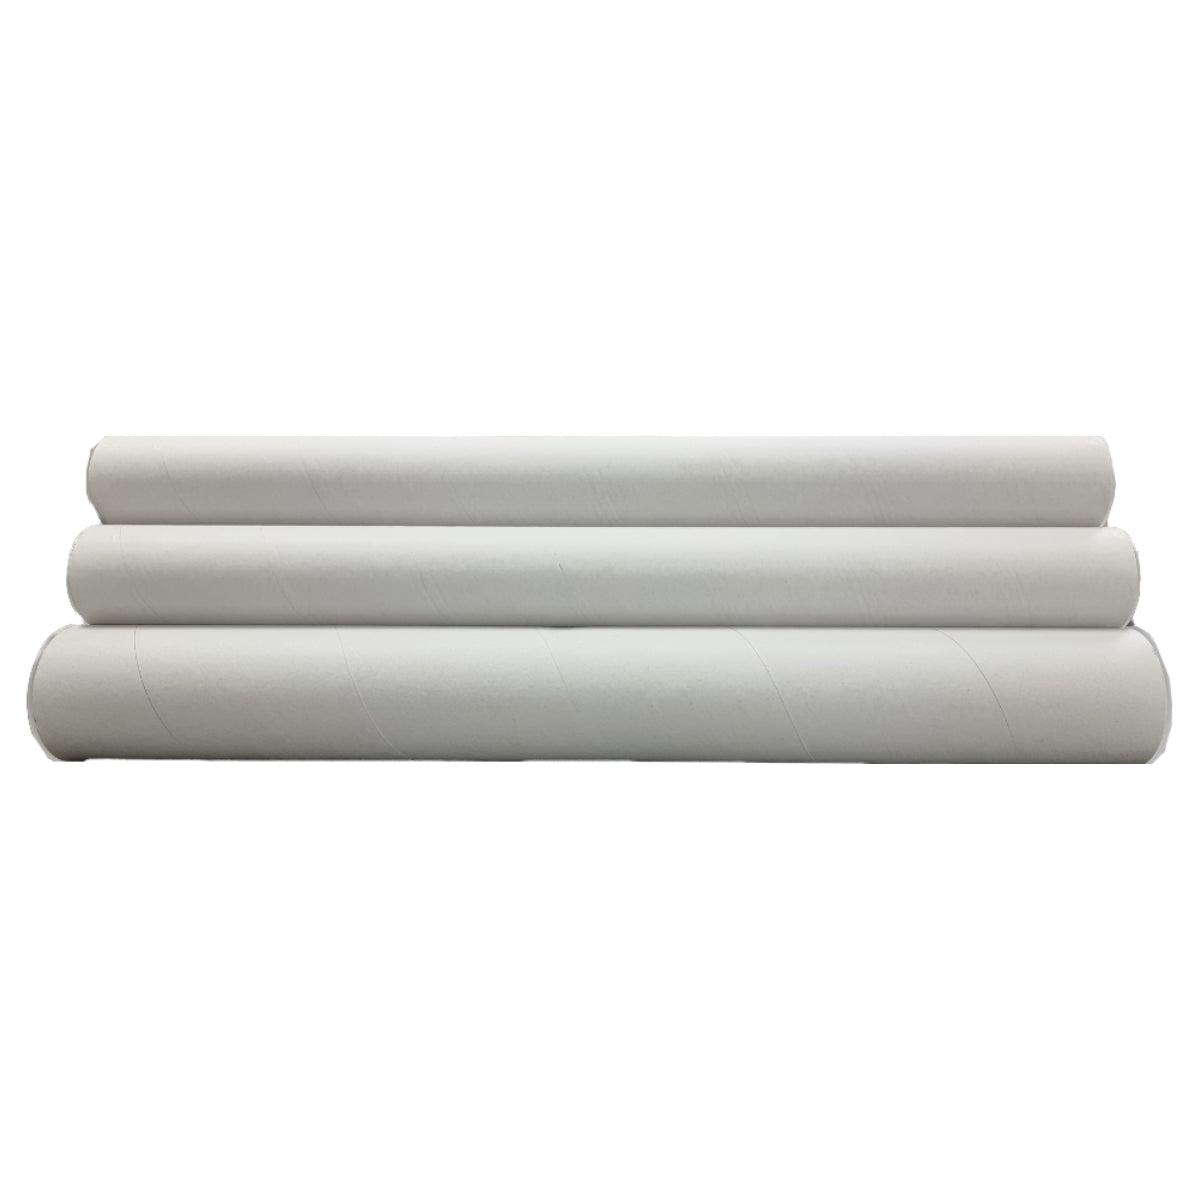 FIS Cardboard Postal/Draft/Drawing Tube with caps, 2 inch x 53 cm, White